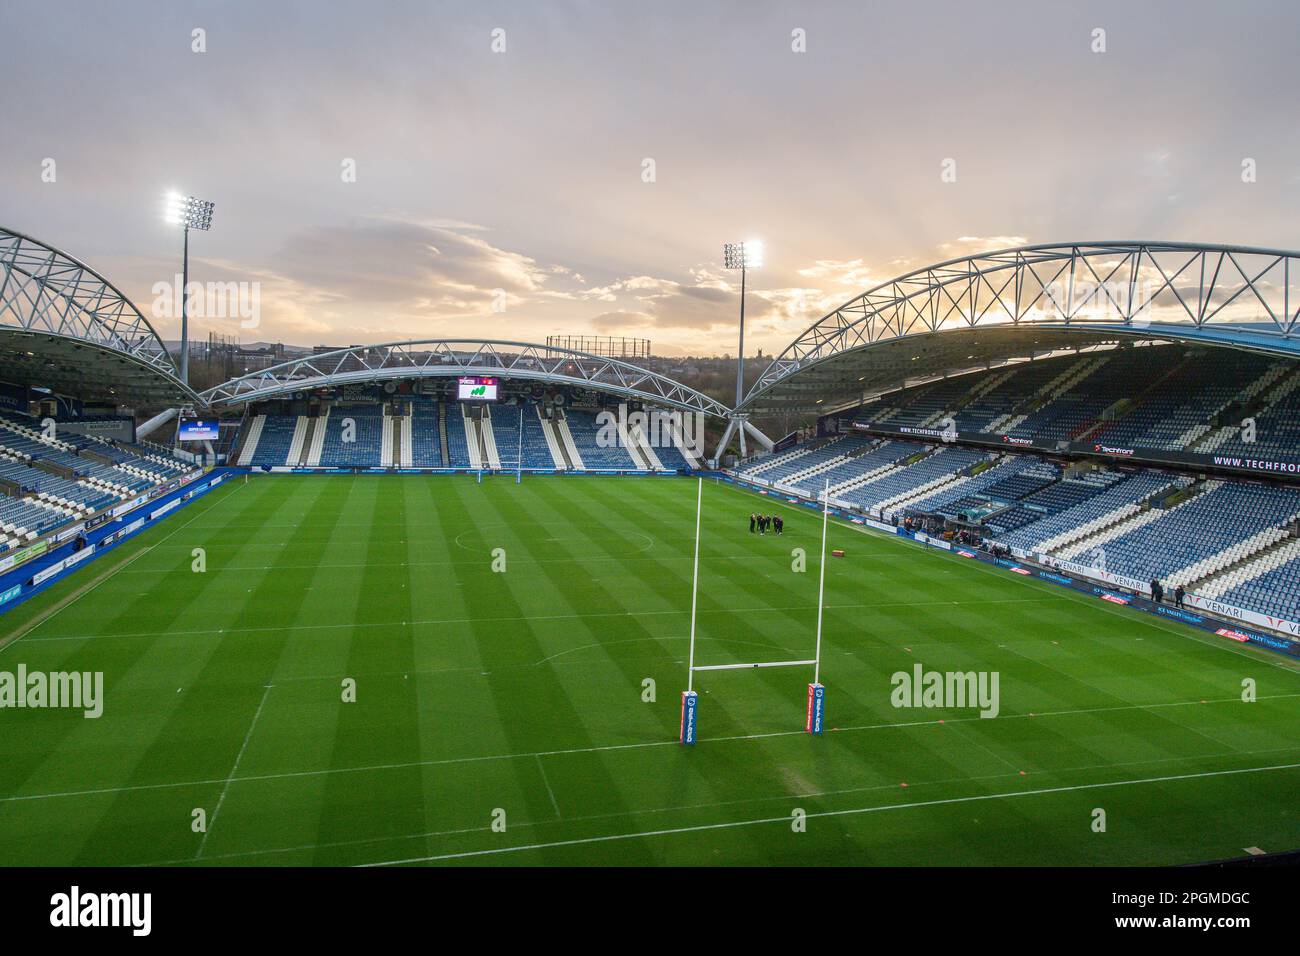 General view of The John Smith's Stadium, Home of Huddersfield Giants ahead of the Betfred Super League Round 6 match Huddersfield Giants vs St Helens at John Smith's Stadium, Huddersfield, United Kingdom, 23rd March 2023  (Photo by Craig Thomas/News Images) Stock Photo